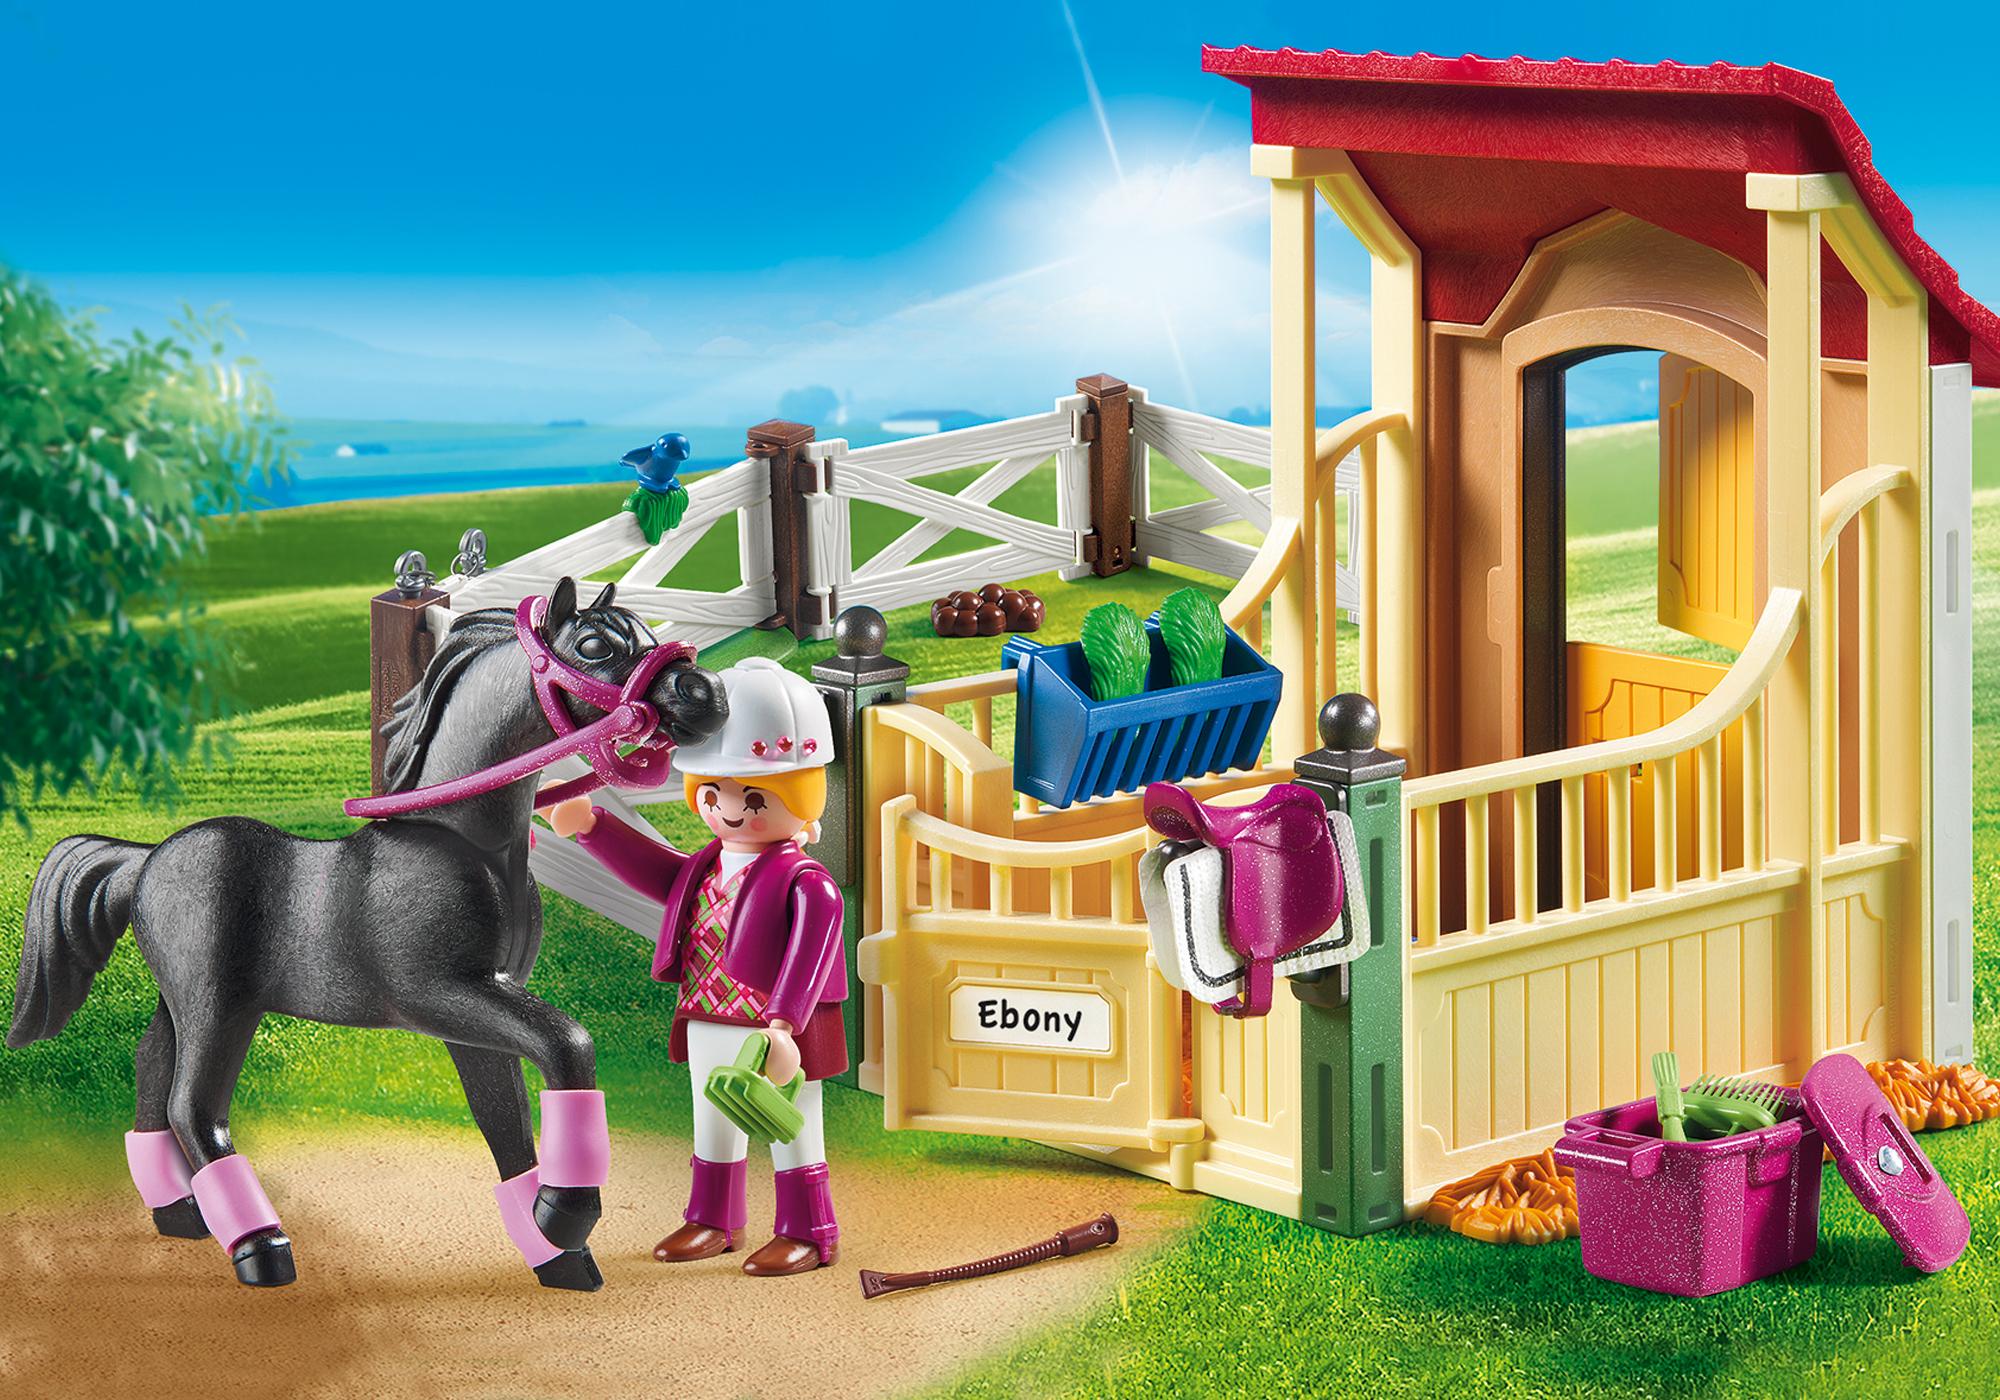 playmobil horse stable